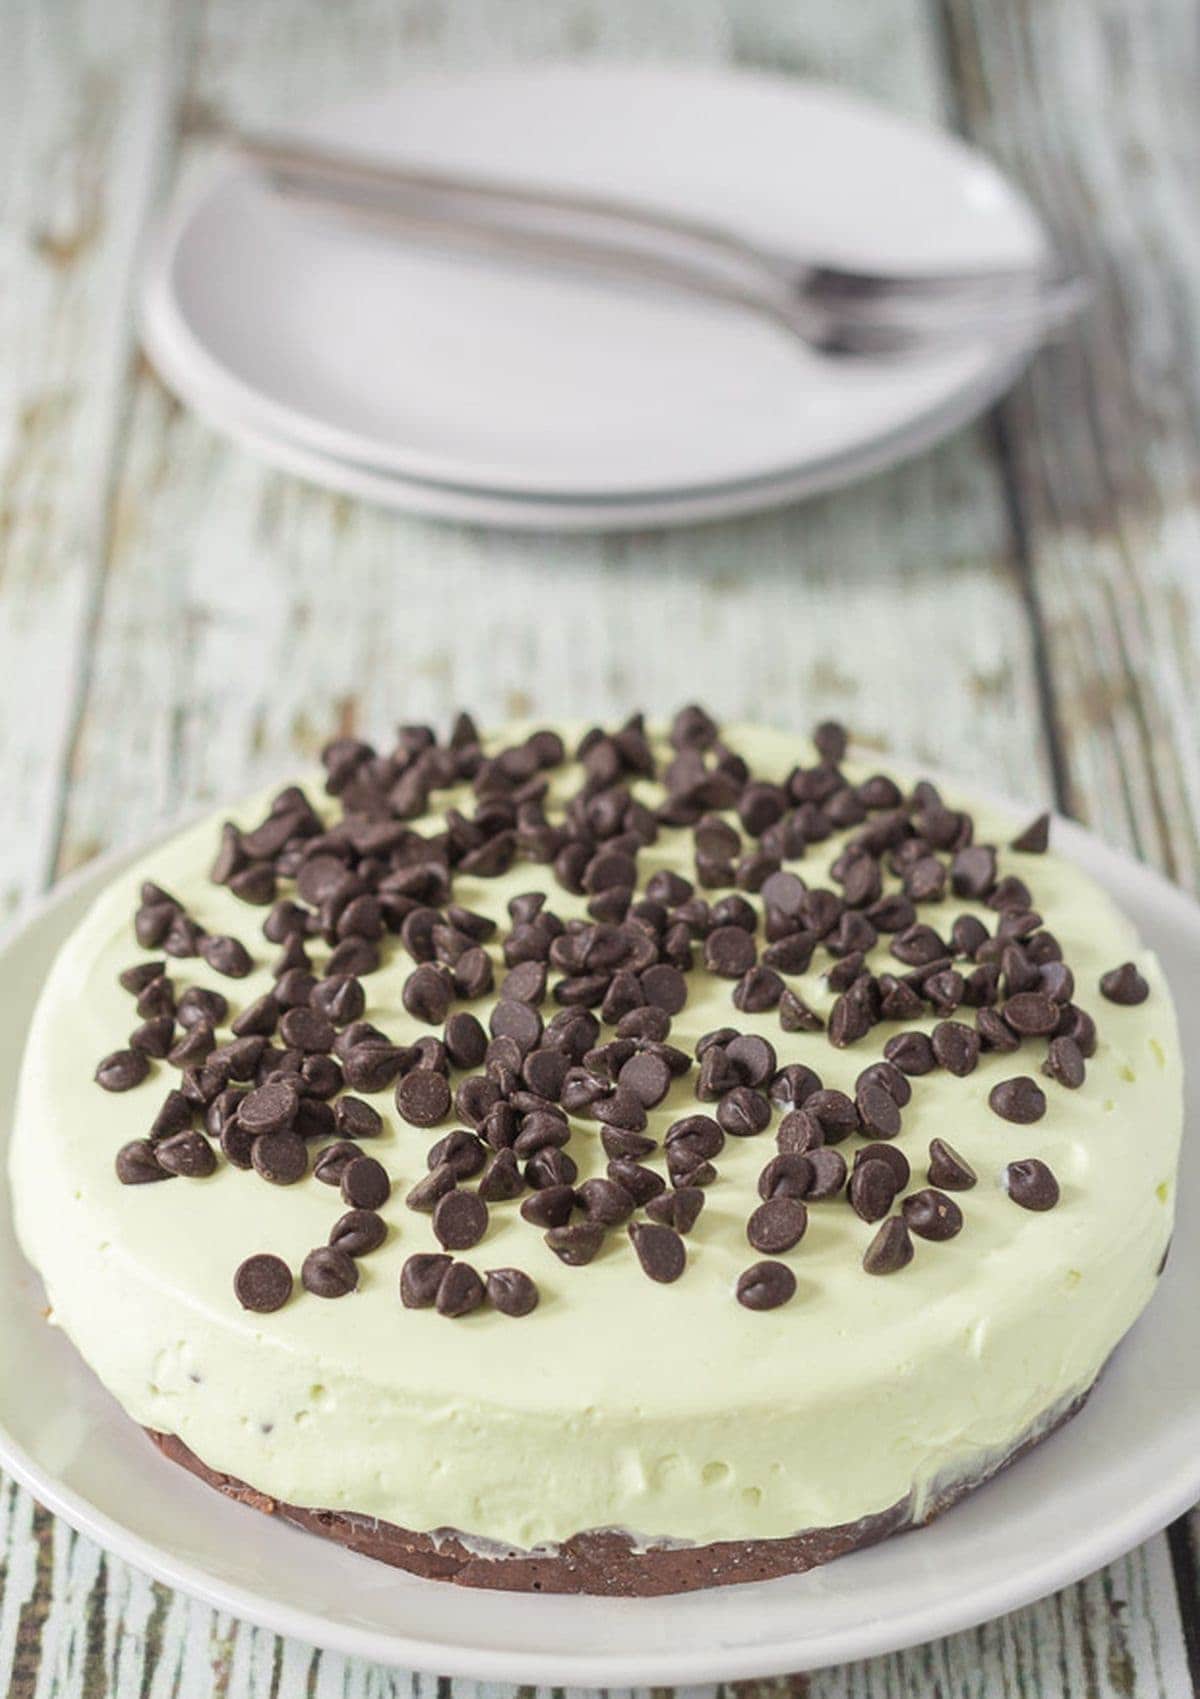 No bake mint chocolate chip cheesecake on a plate. Serving plates and forks in the background.